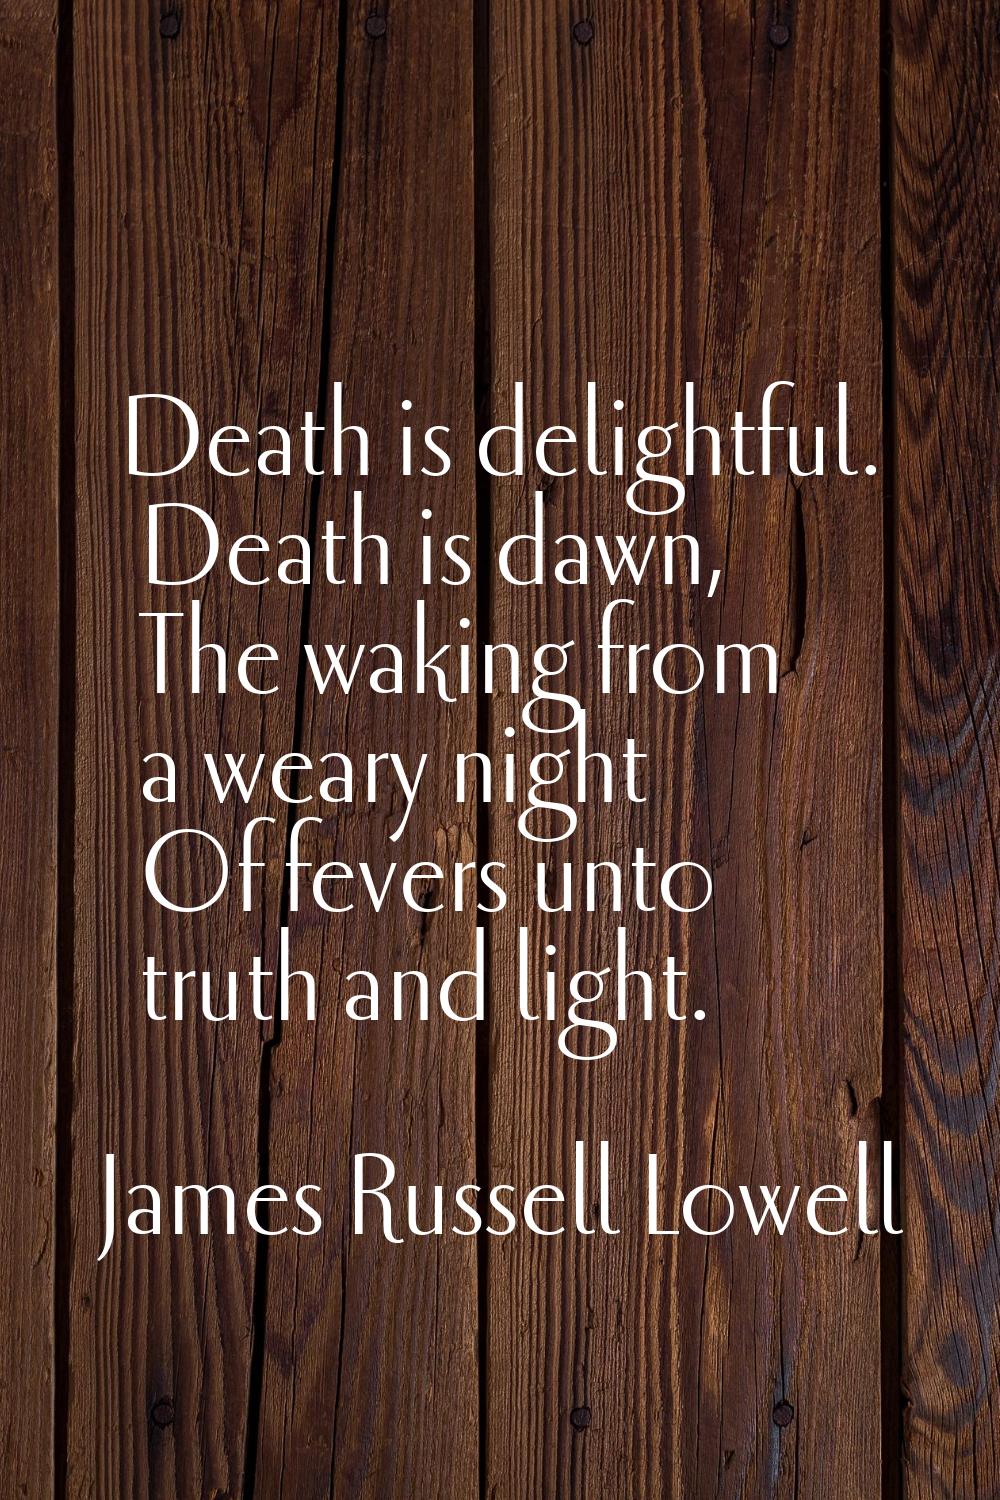 Death is delightful. Death is dawn, The waking from a weary night Of fevers unto truth and light.